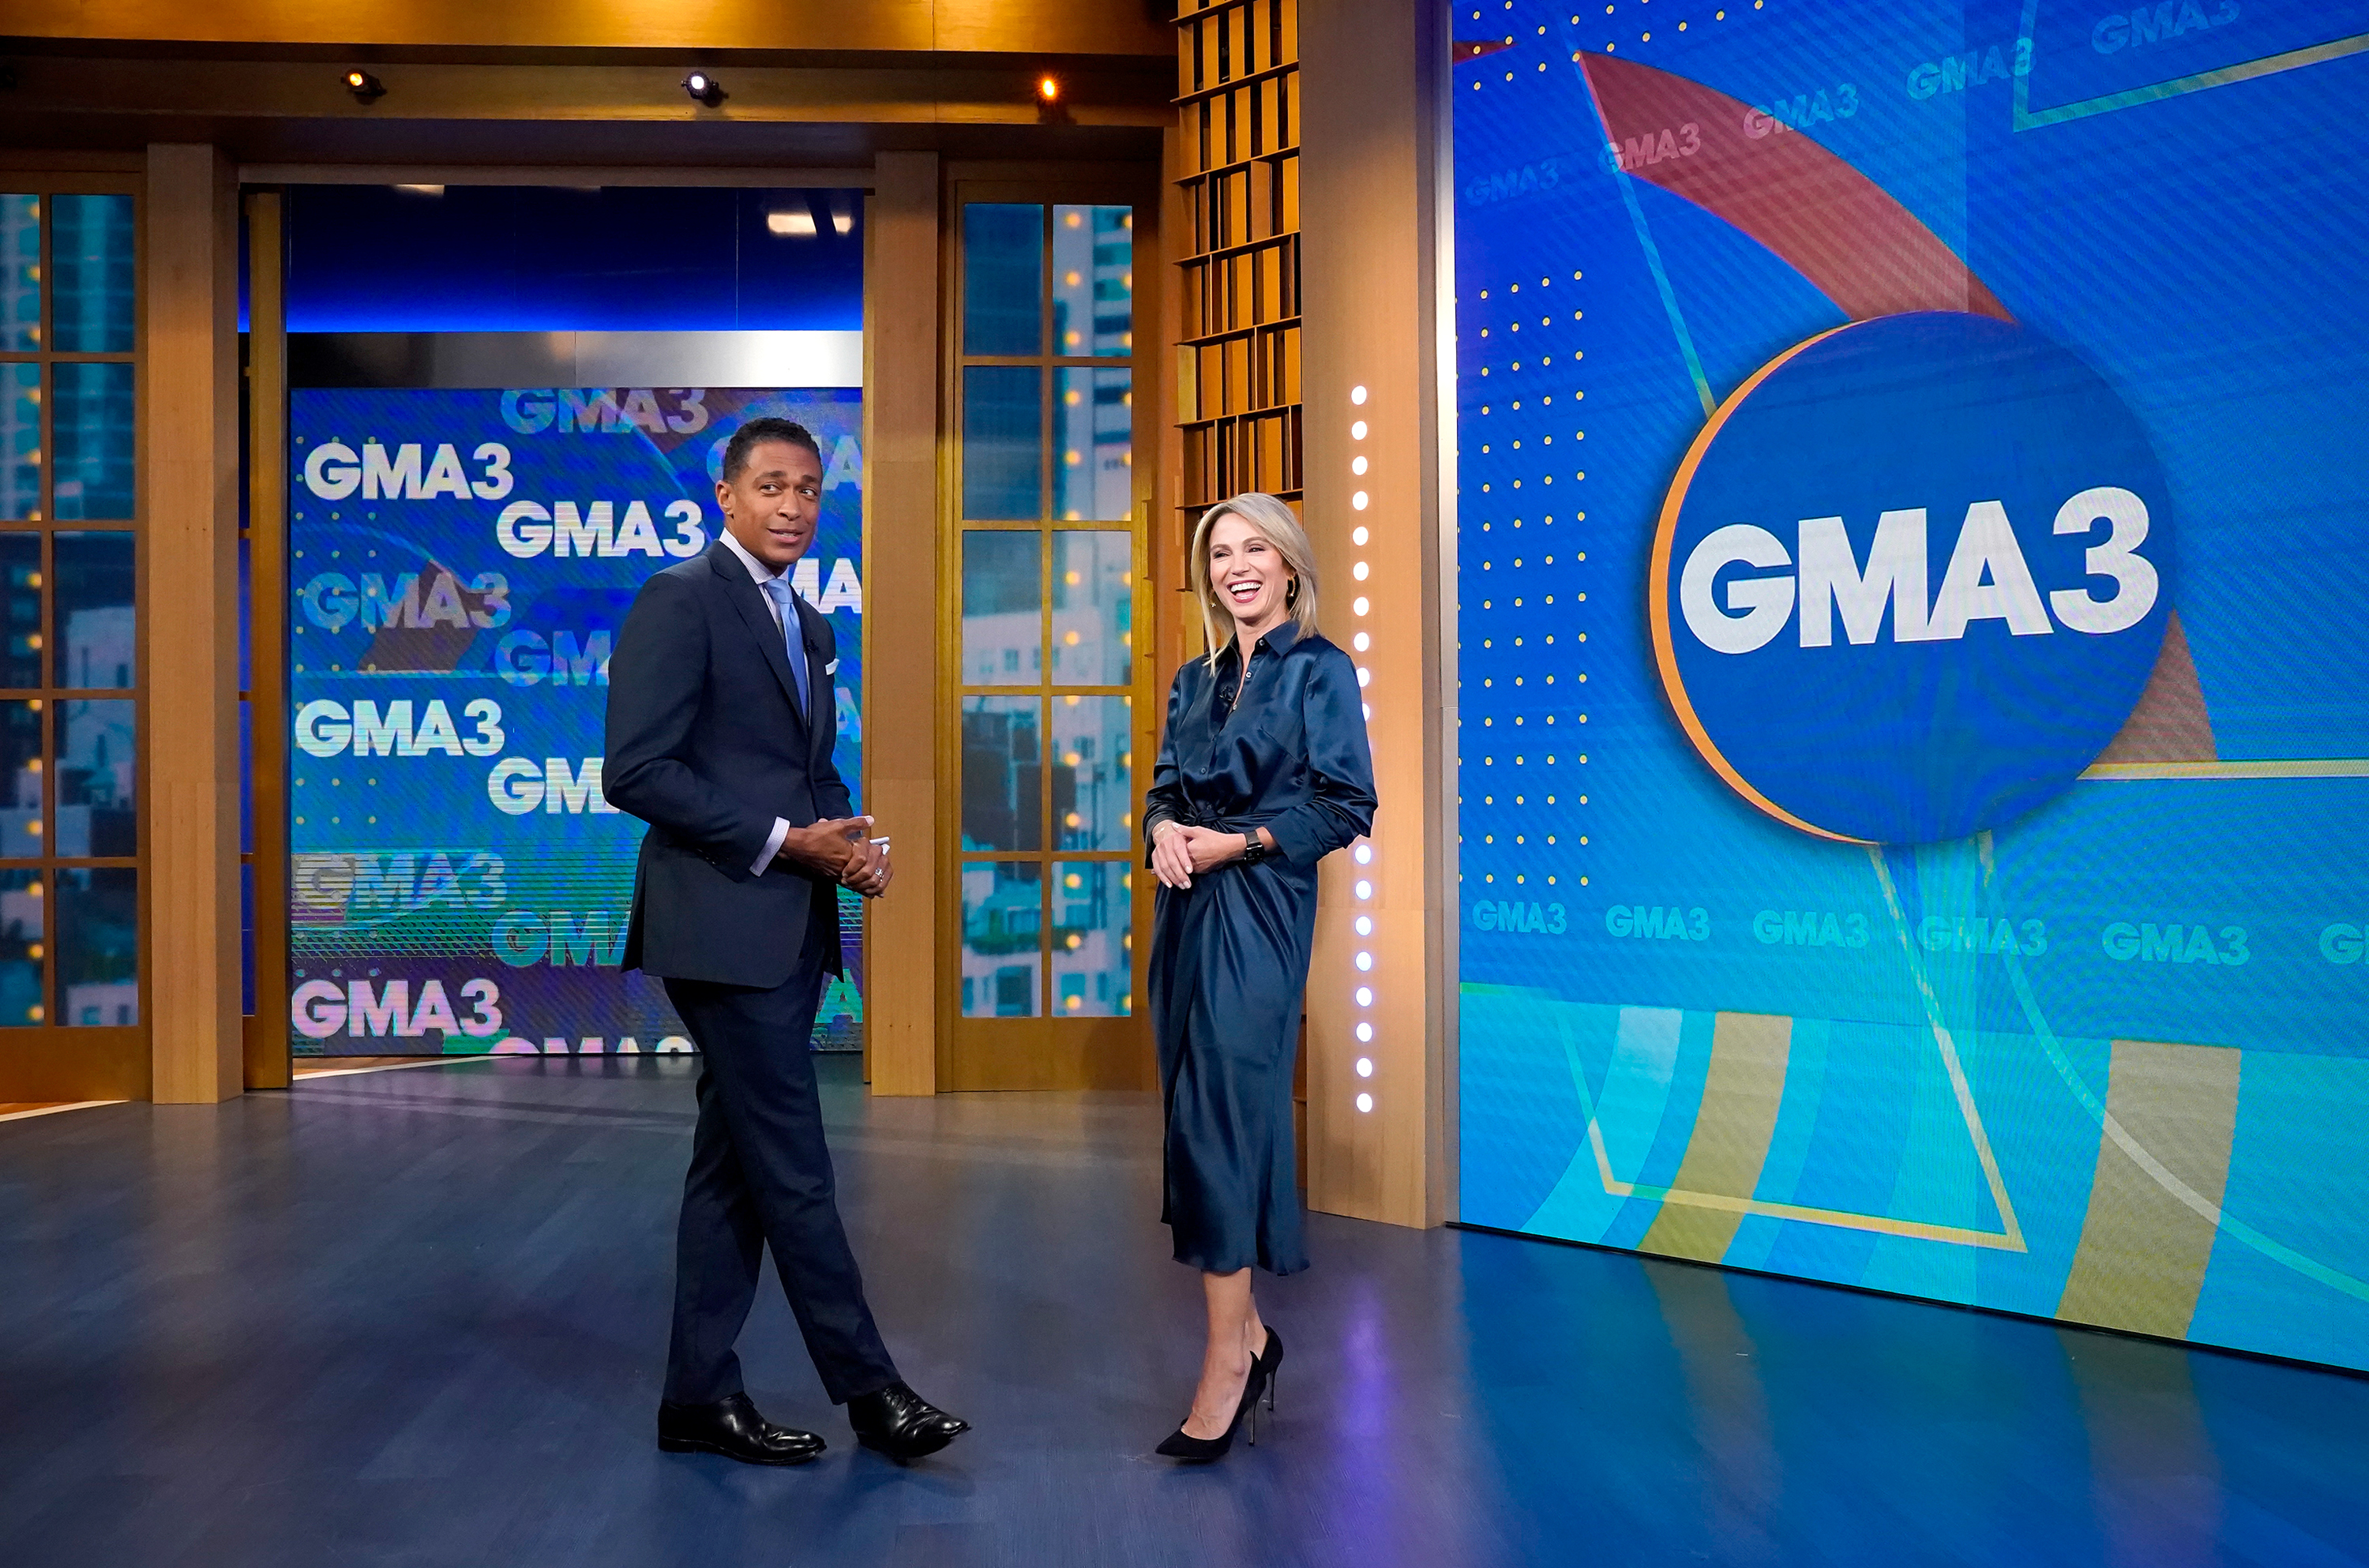 TJ and Amy co-anchored GMA3 before they were ousted by ABC due to their supposed affair